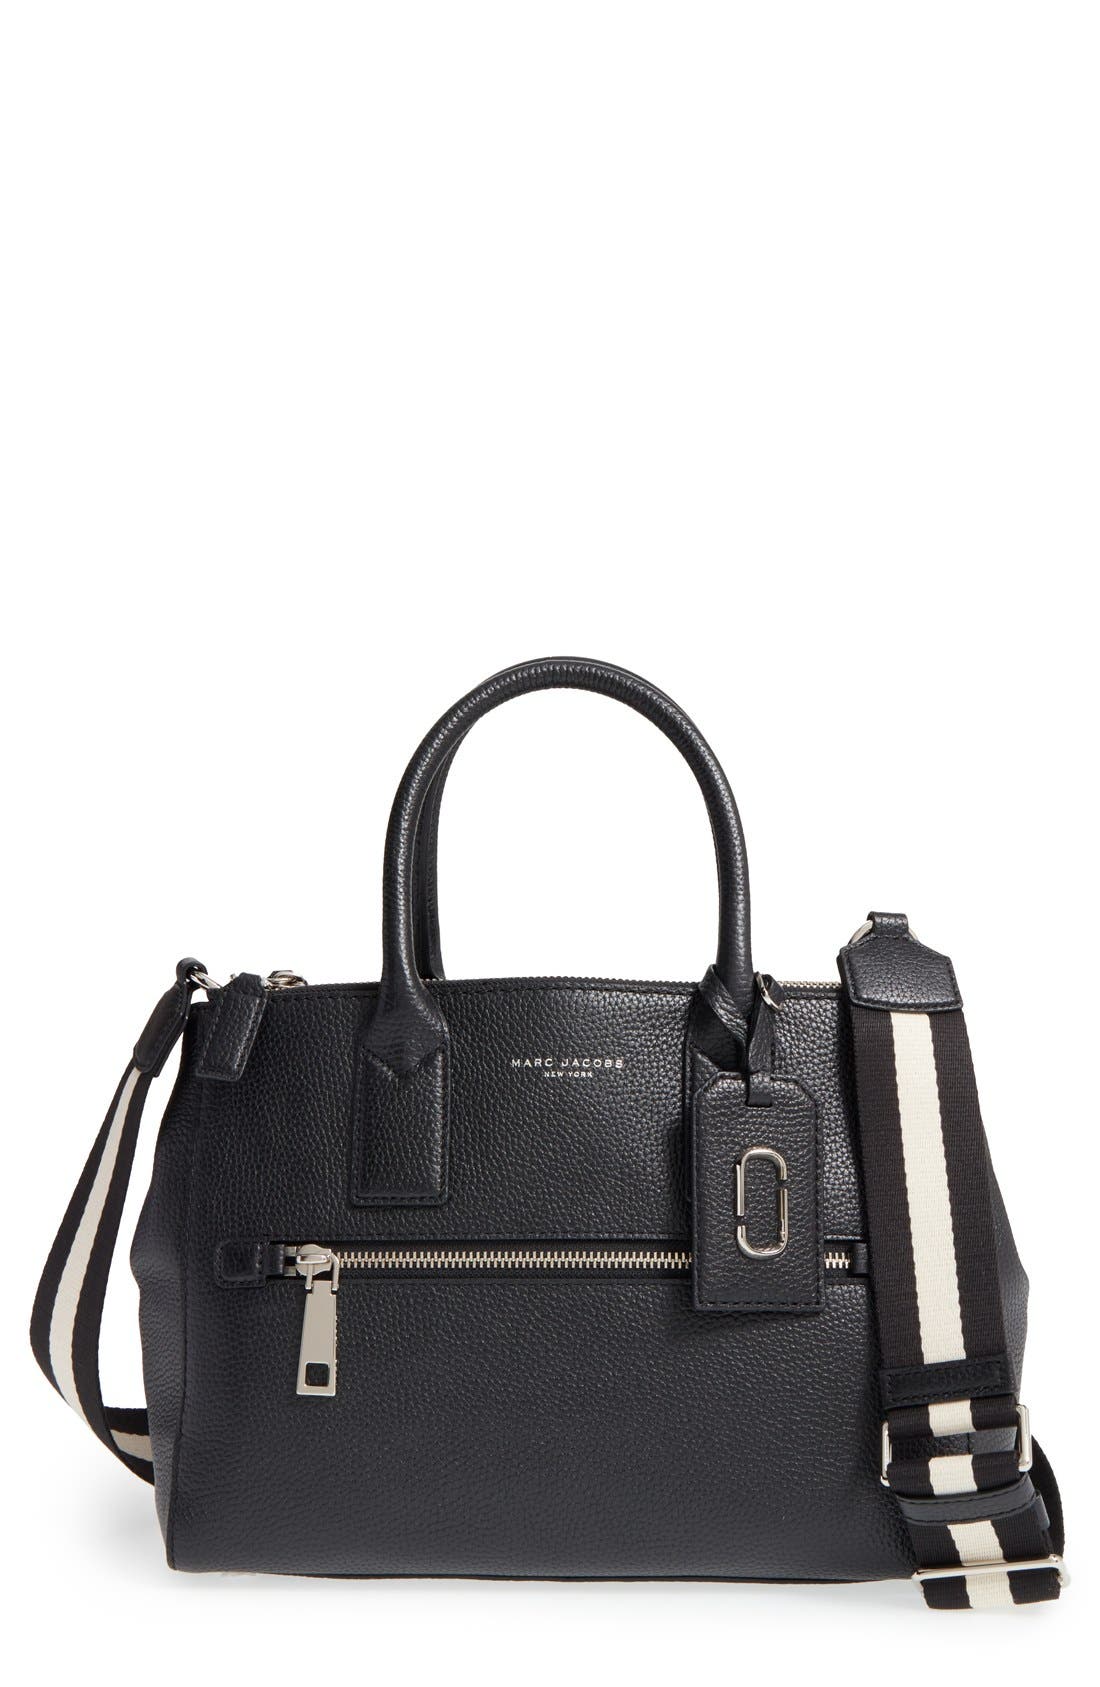 marc jacobs east west tote